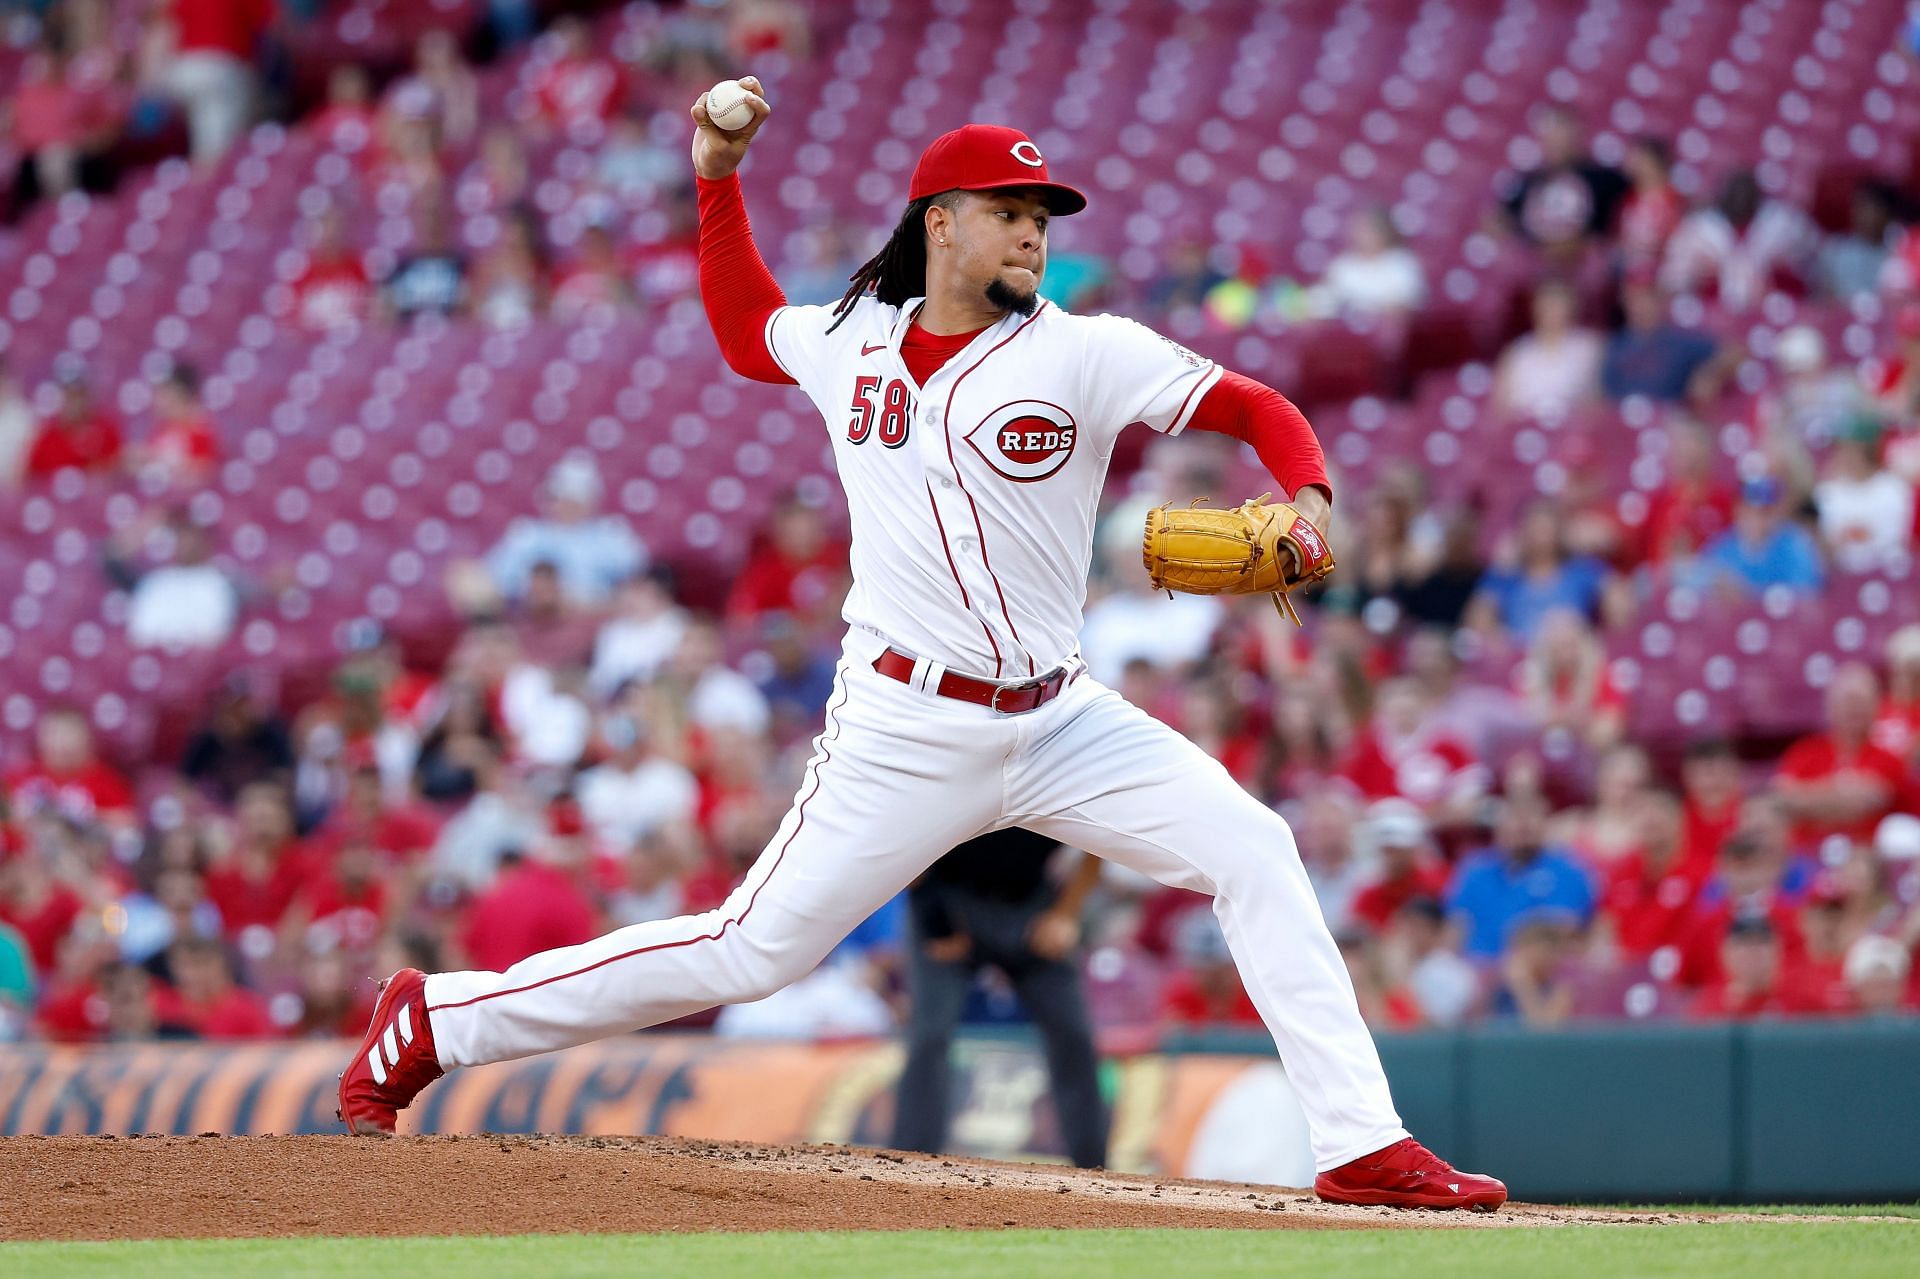 Mariners acquire Pitcher Luis Castillo From Reds in BLOCKBUSTER